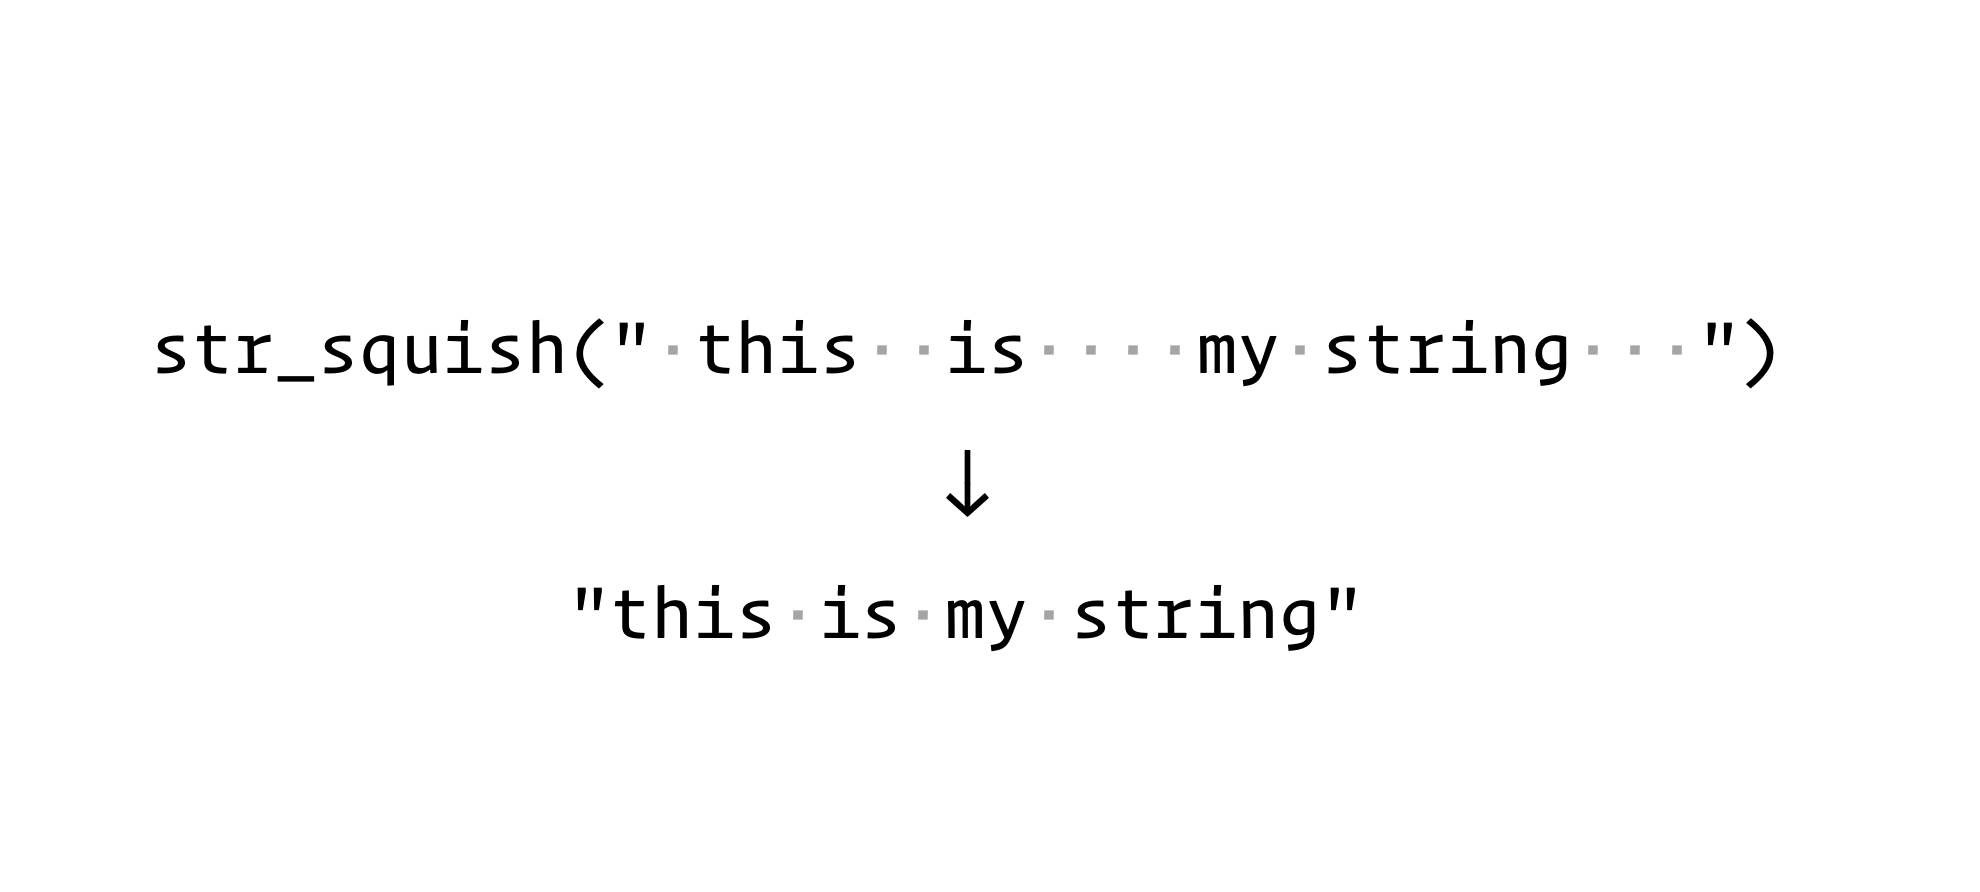 str_squish() is wrapped around a string with dots indicating trailing and leading white space and several internal spaces between words, an arrow shows that the output will have no leading or trailing white space and the internal spaces will be reduced to single spaces between words.